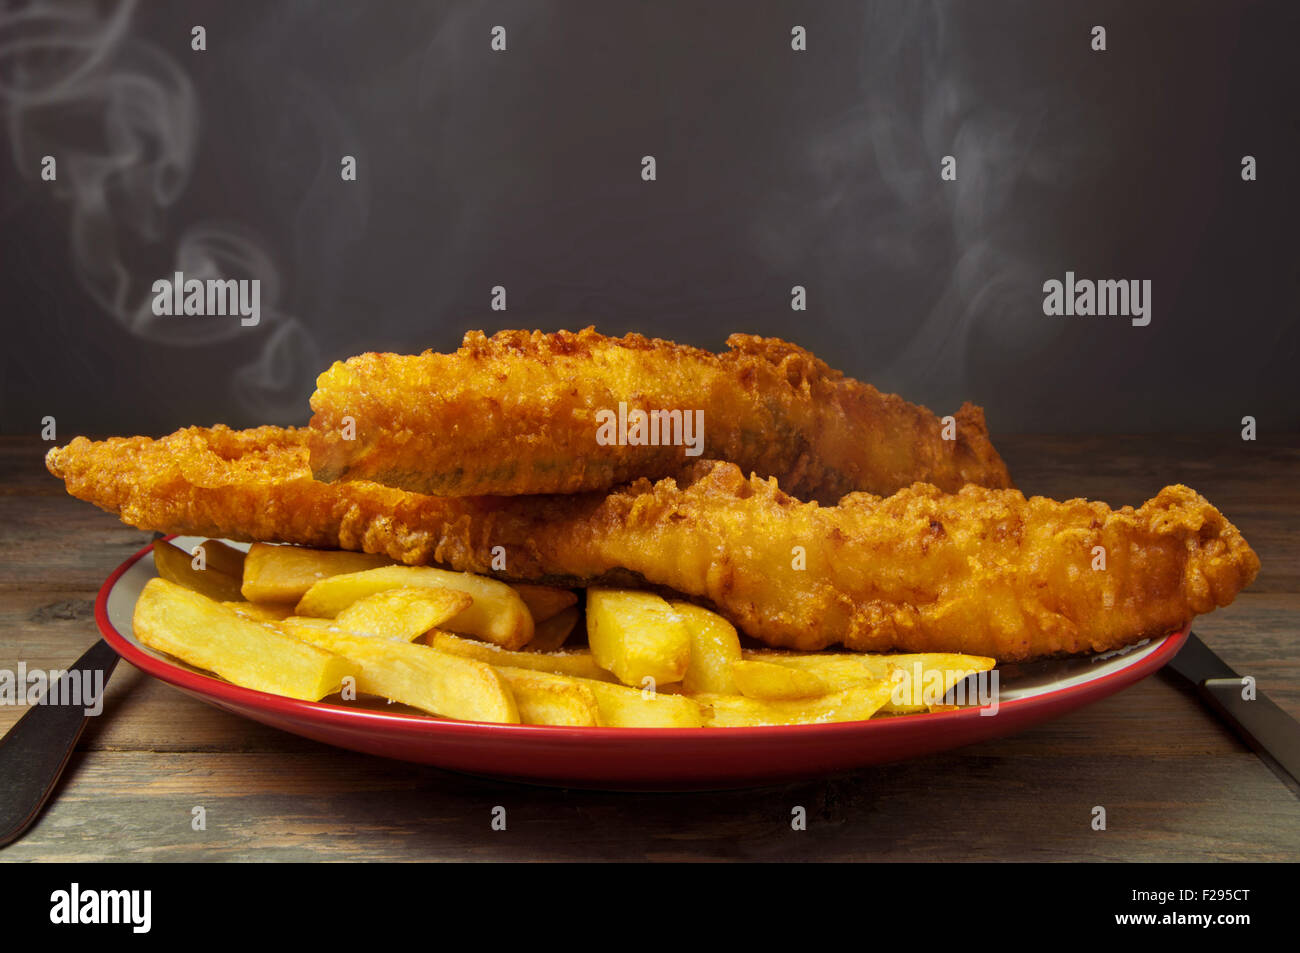 Hot plate of traditional fish and chips Stock Photo